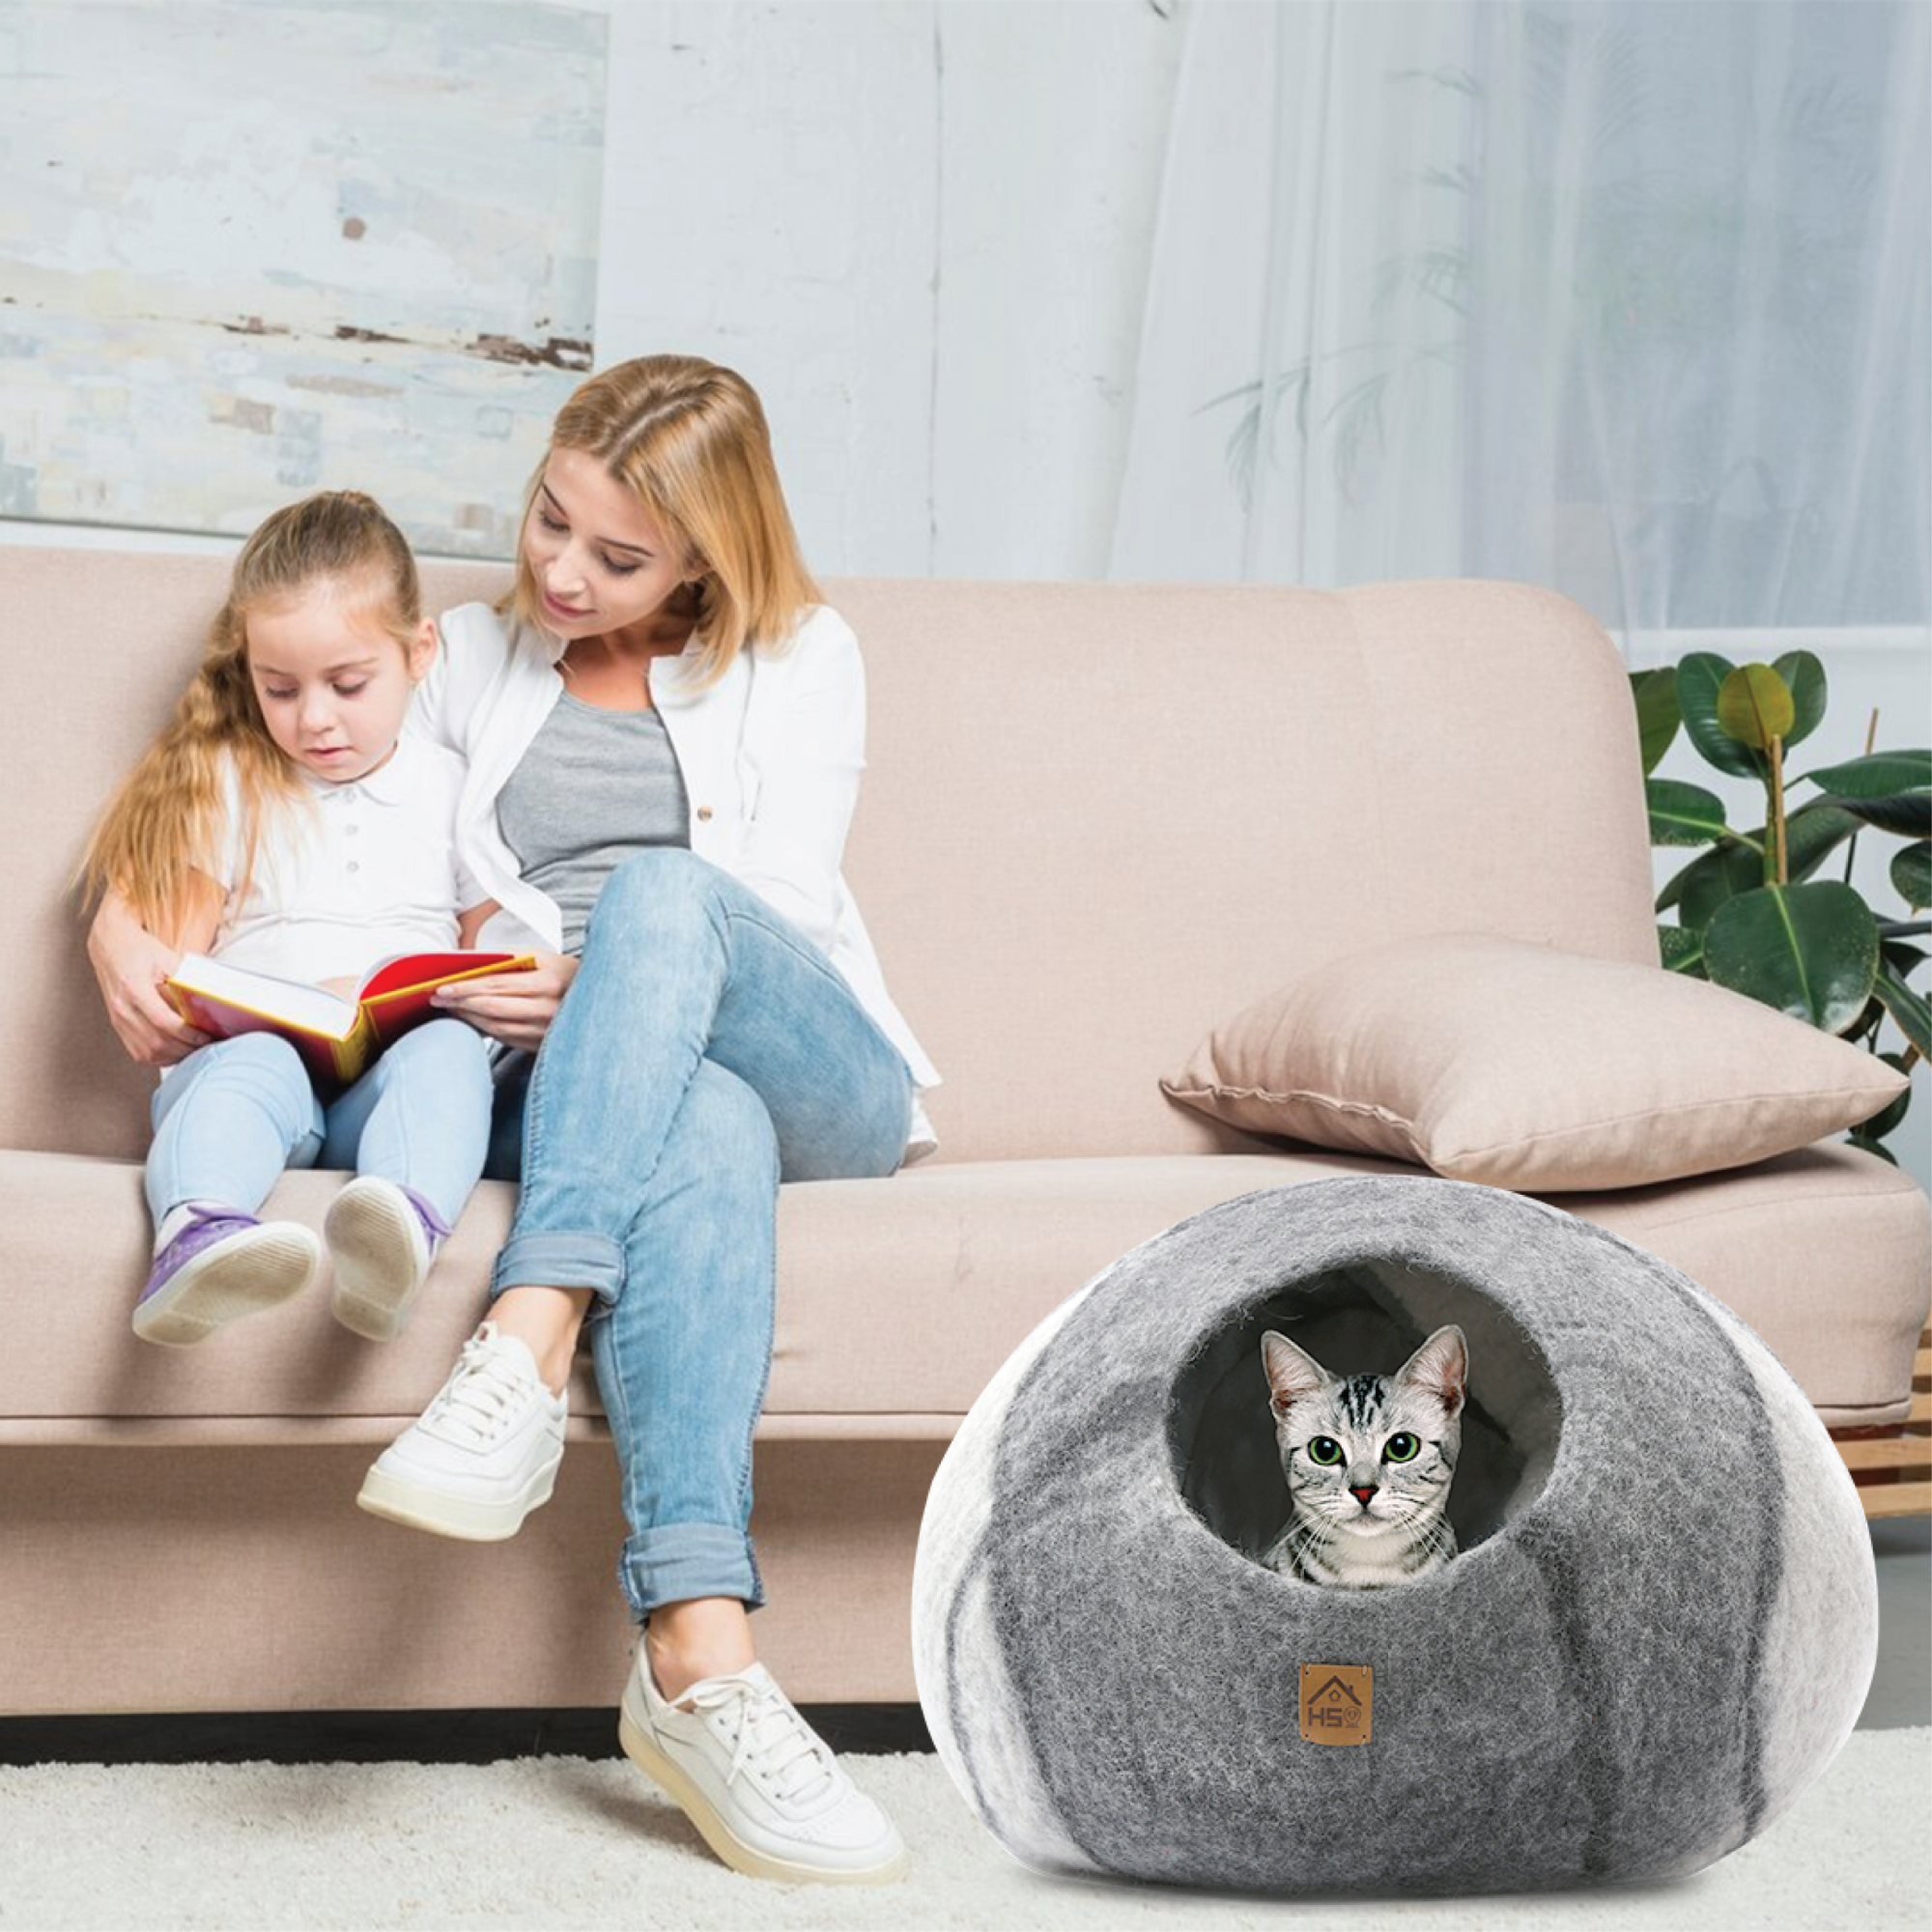 Handcrafted Wool Cat Cave: A cozy retreat for your feline friend. Made from natural wool, this cave provides warmth and security for cats to snuggle and rest. Perfect for promoting relaxation and reducing anxiety in you